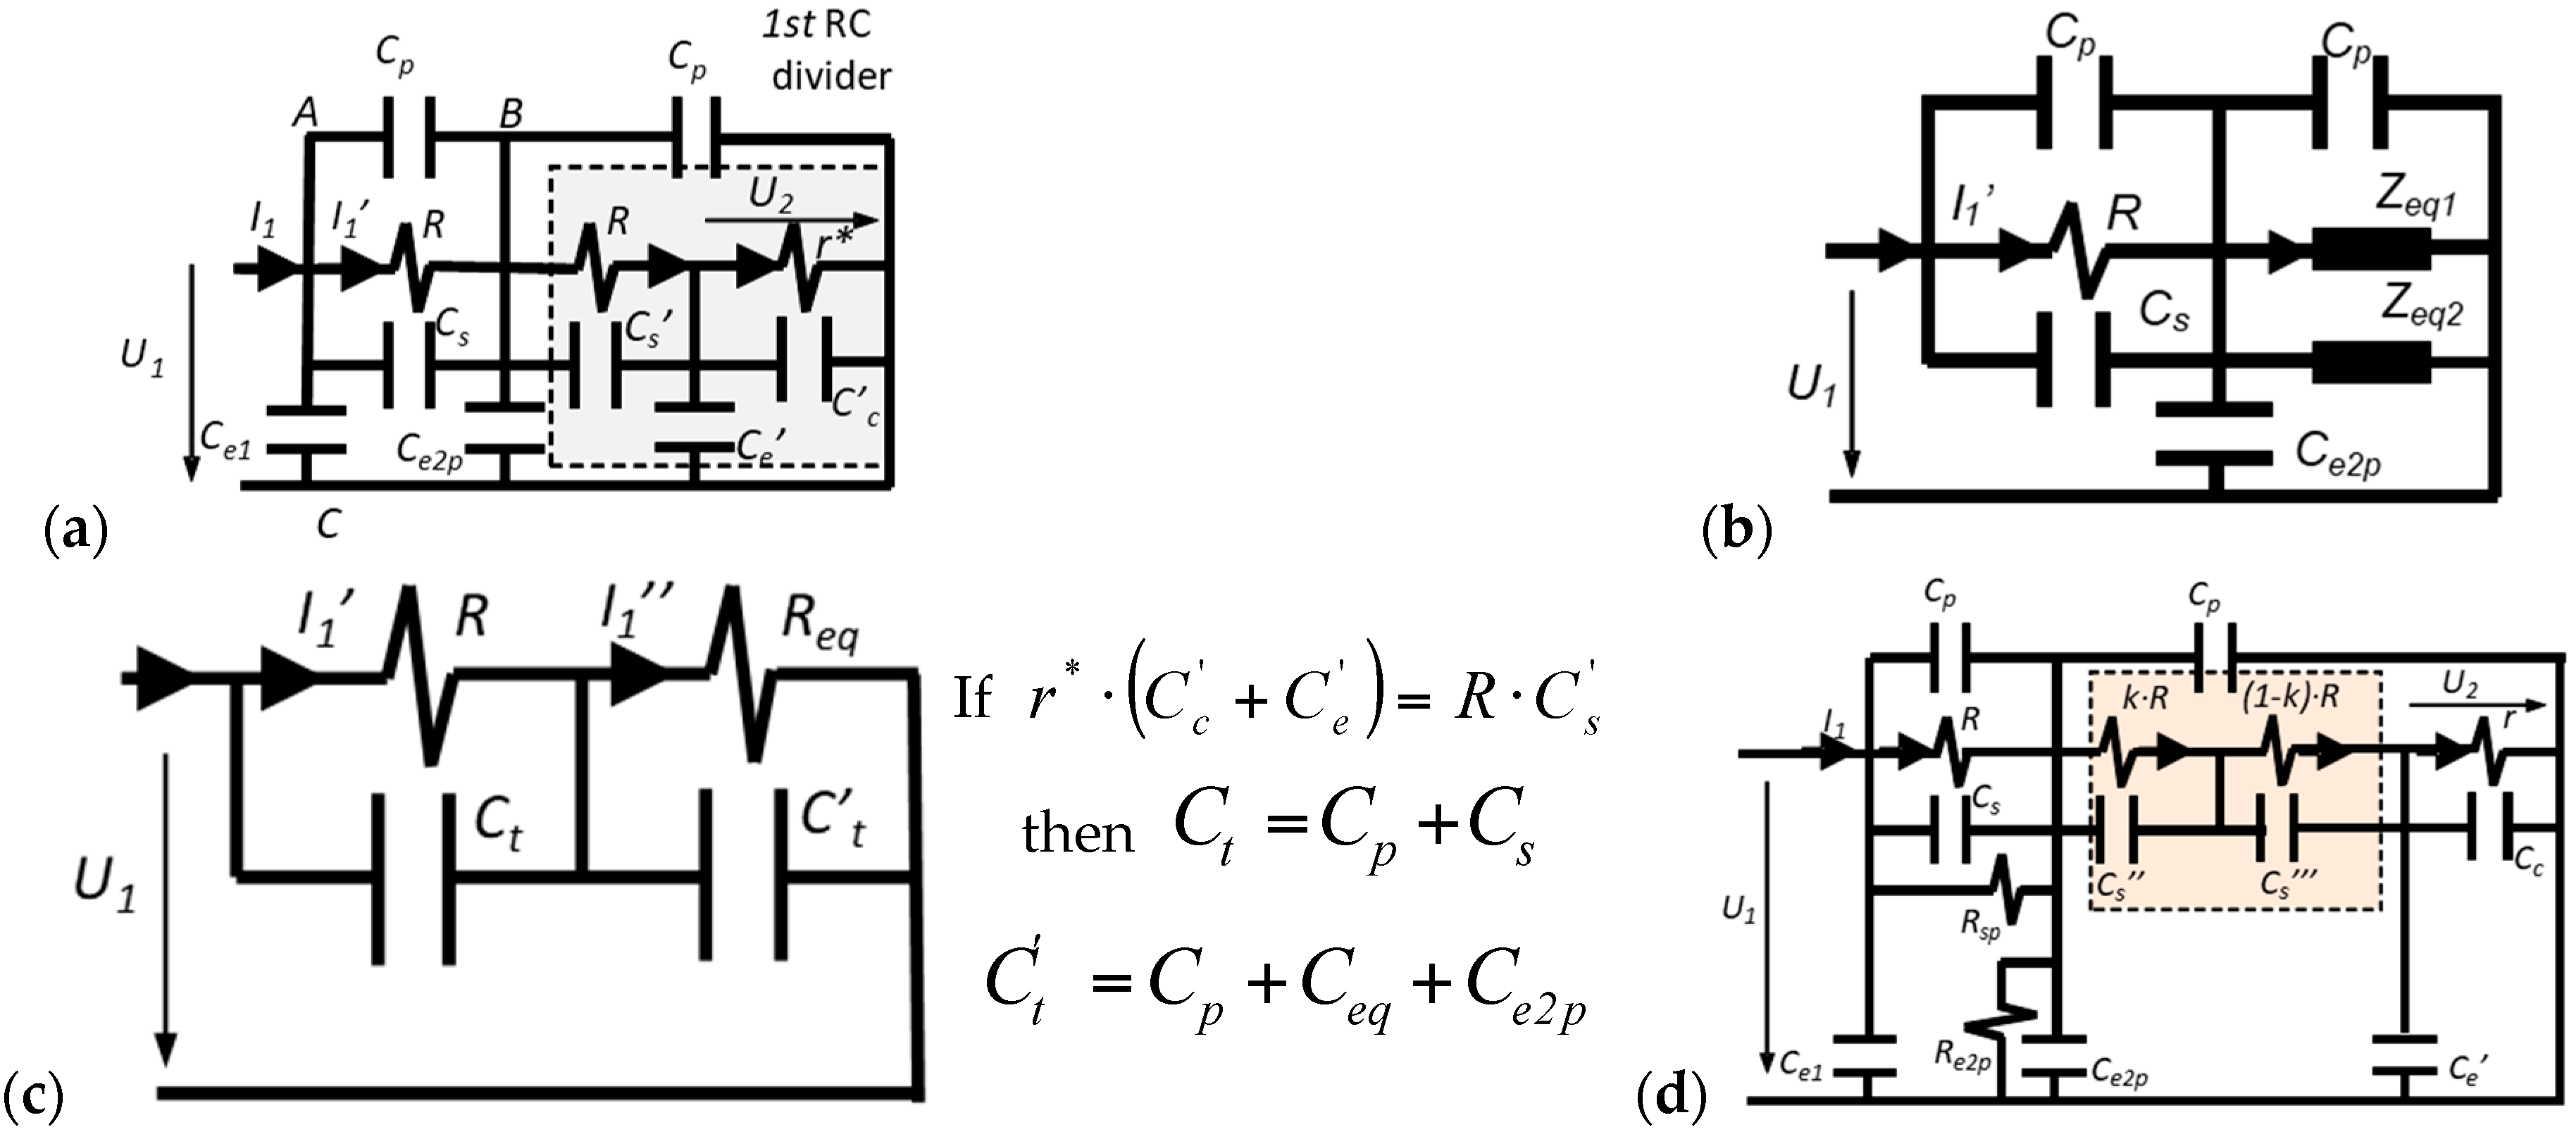 Sensors Free Full Text The Design And Characterization Of A Prototype Wideband Voltage Sensor Based On A Resistive Divider Html